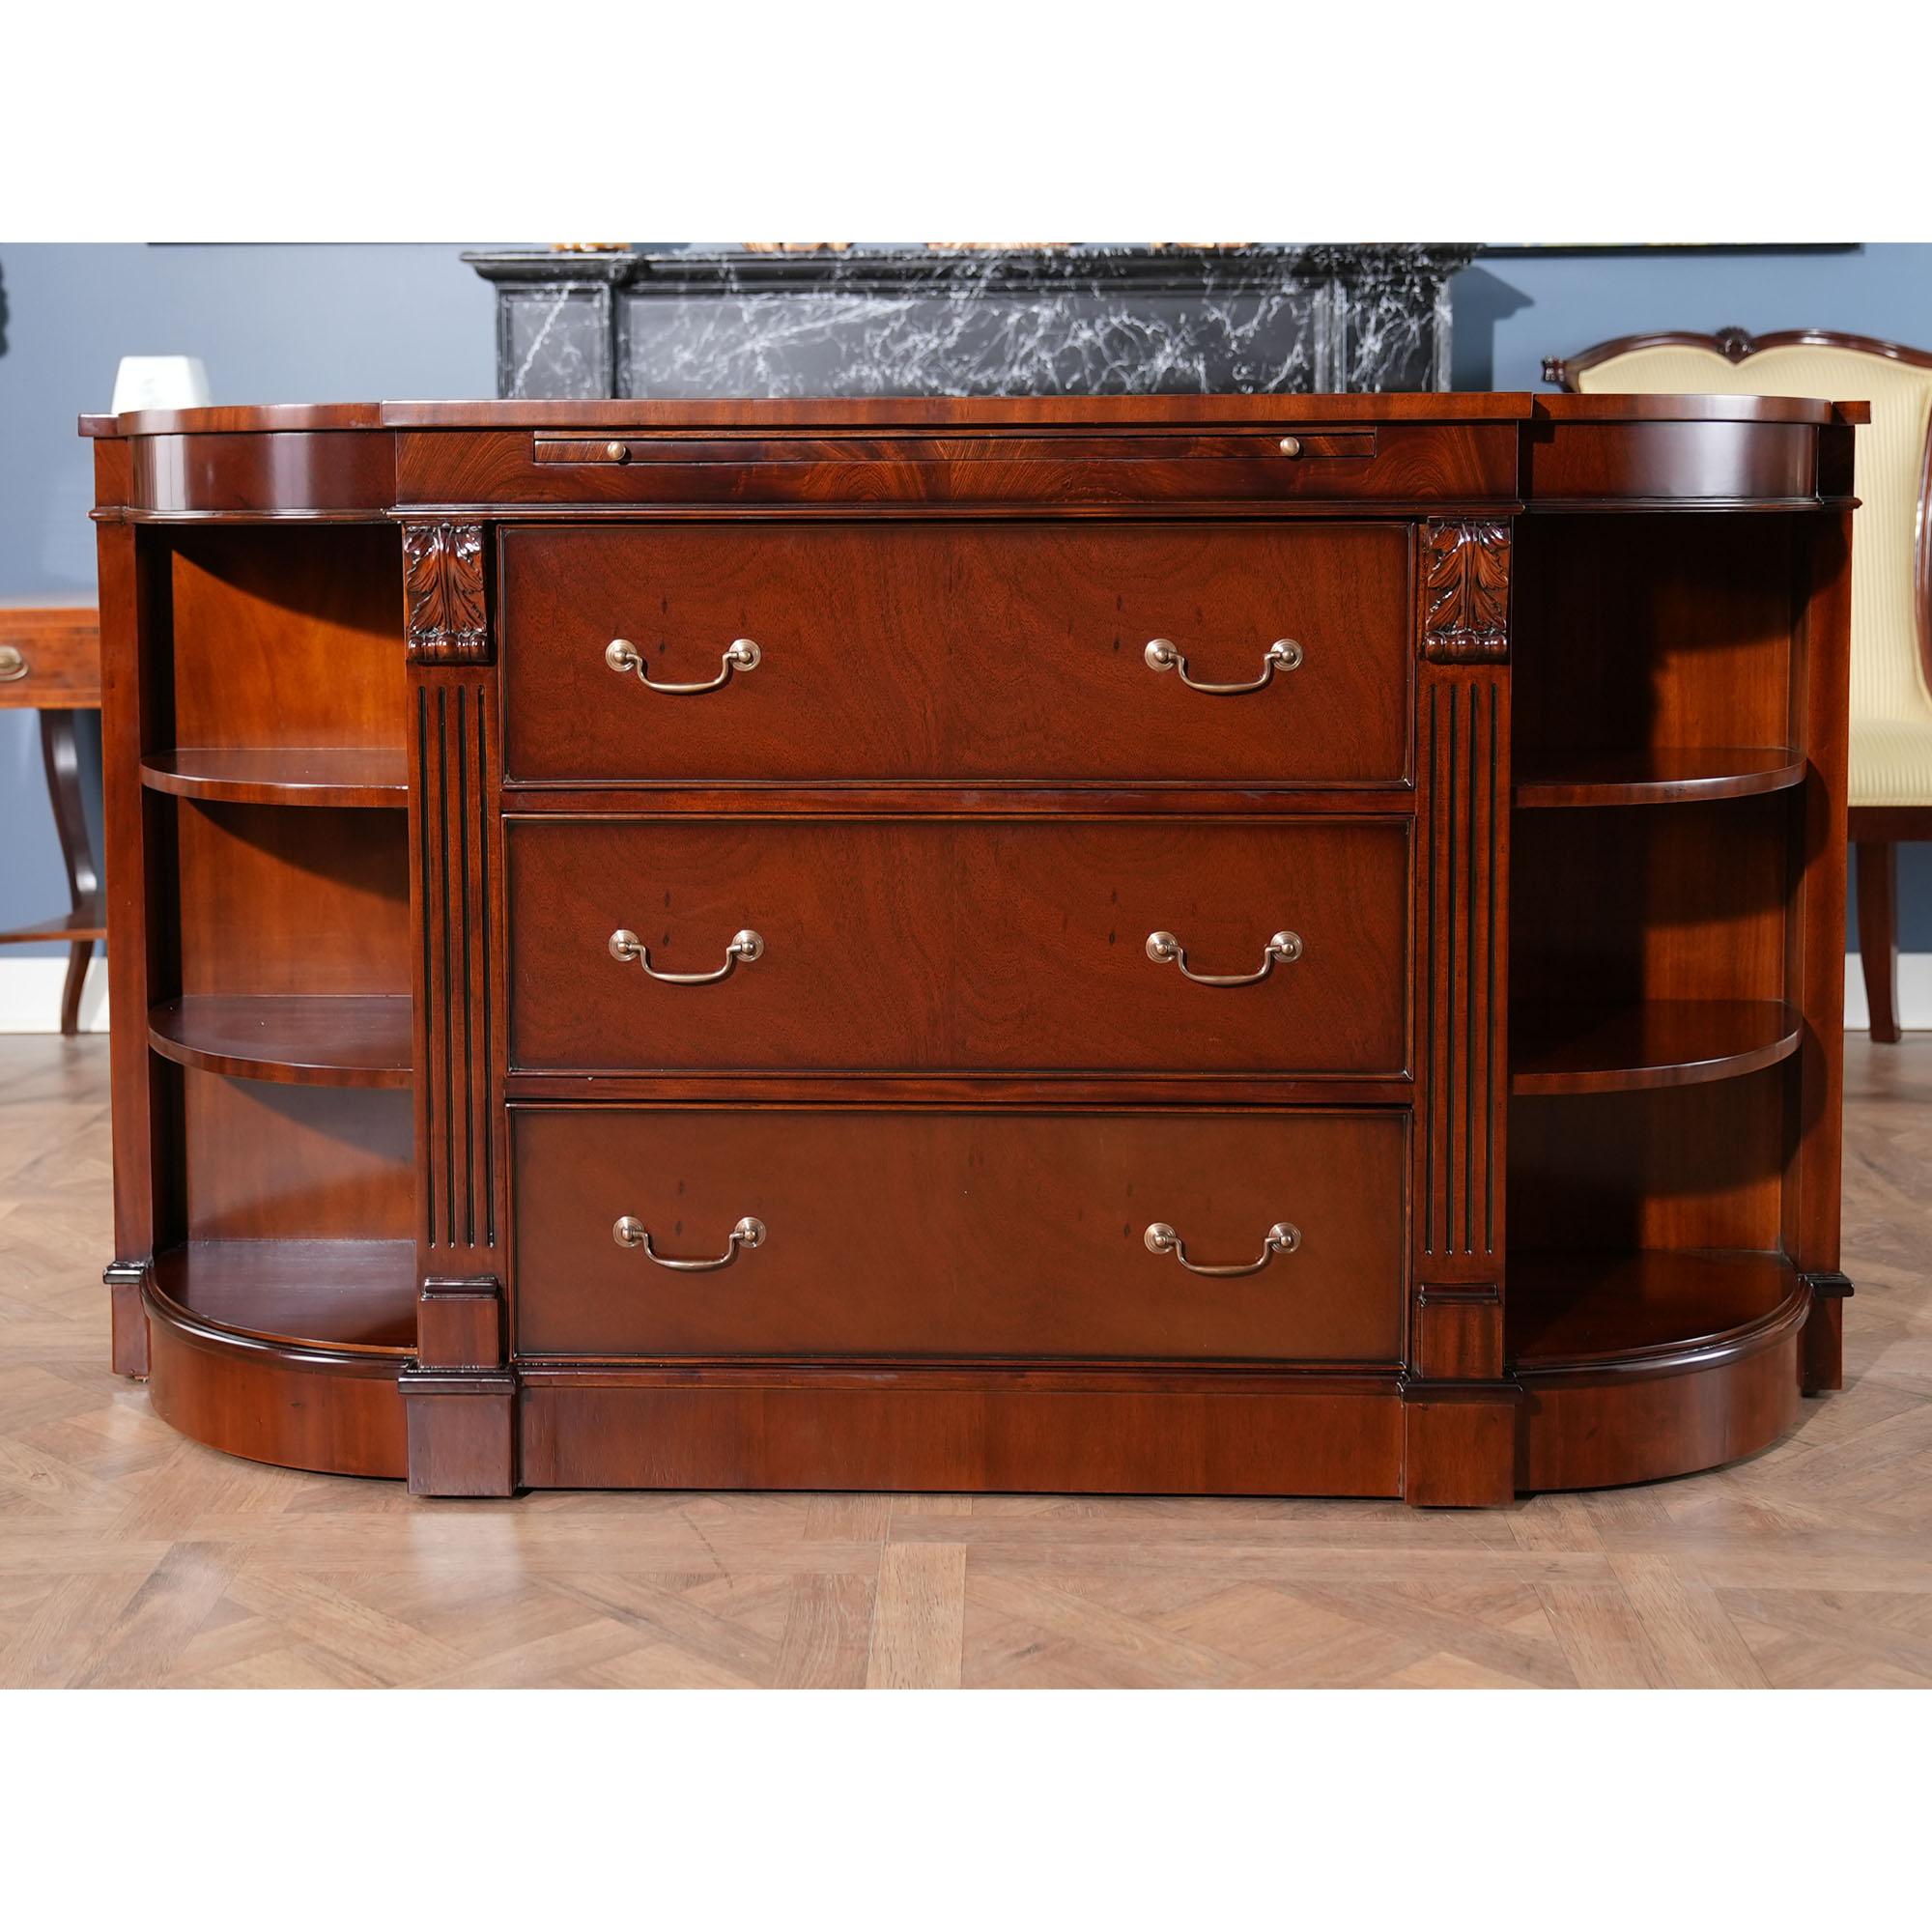 The Niagara Furniture Mahogany Credenza with Pullout Slide. This stylish piece has fantastic details throughout; including a genuine full grain leather inset pull out tray, beautiful, solid brass drawer pulls, hand carved solid mahogany carvings and